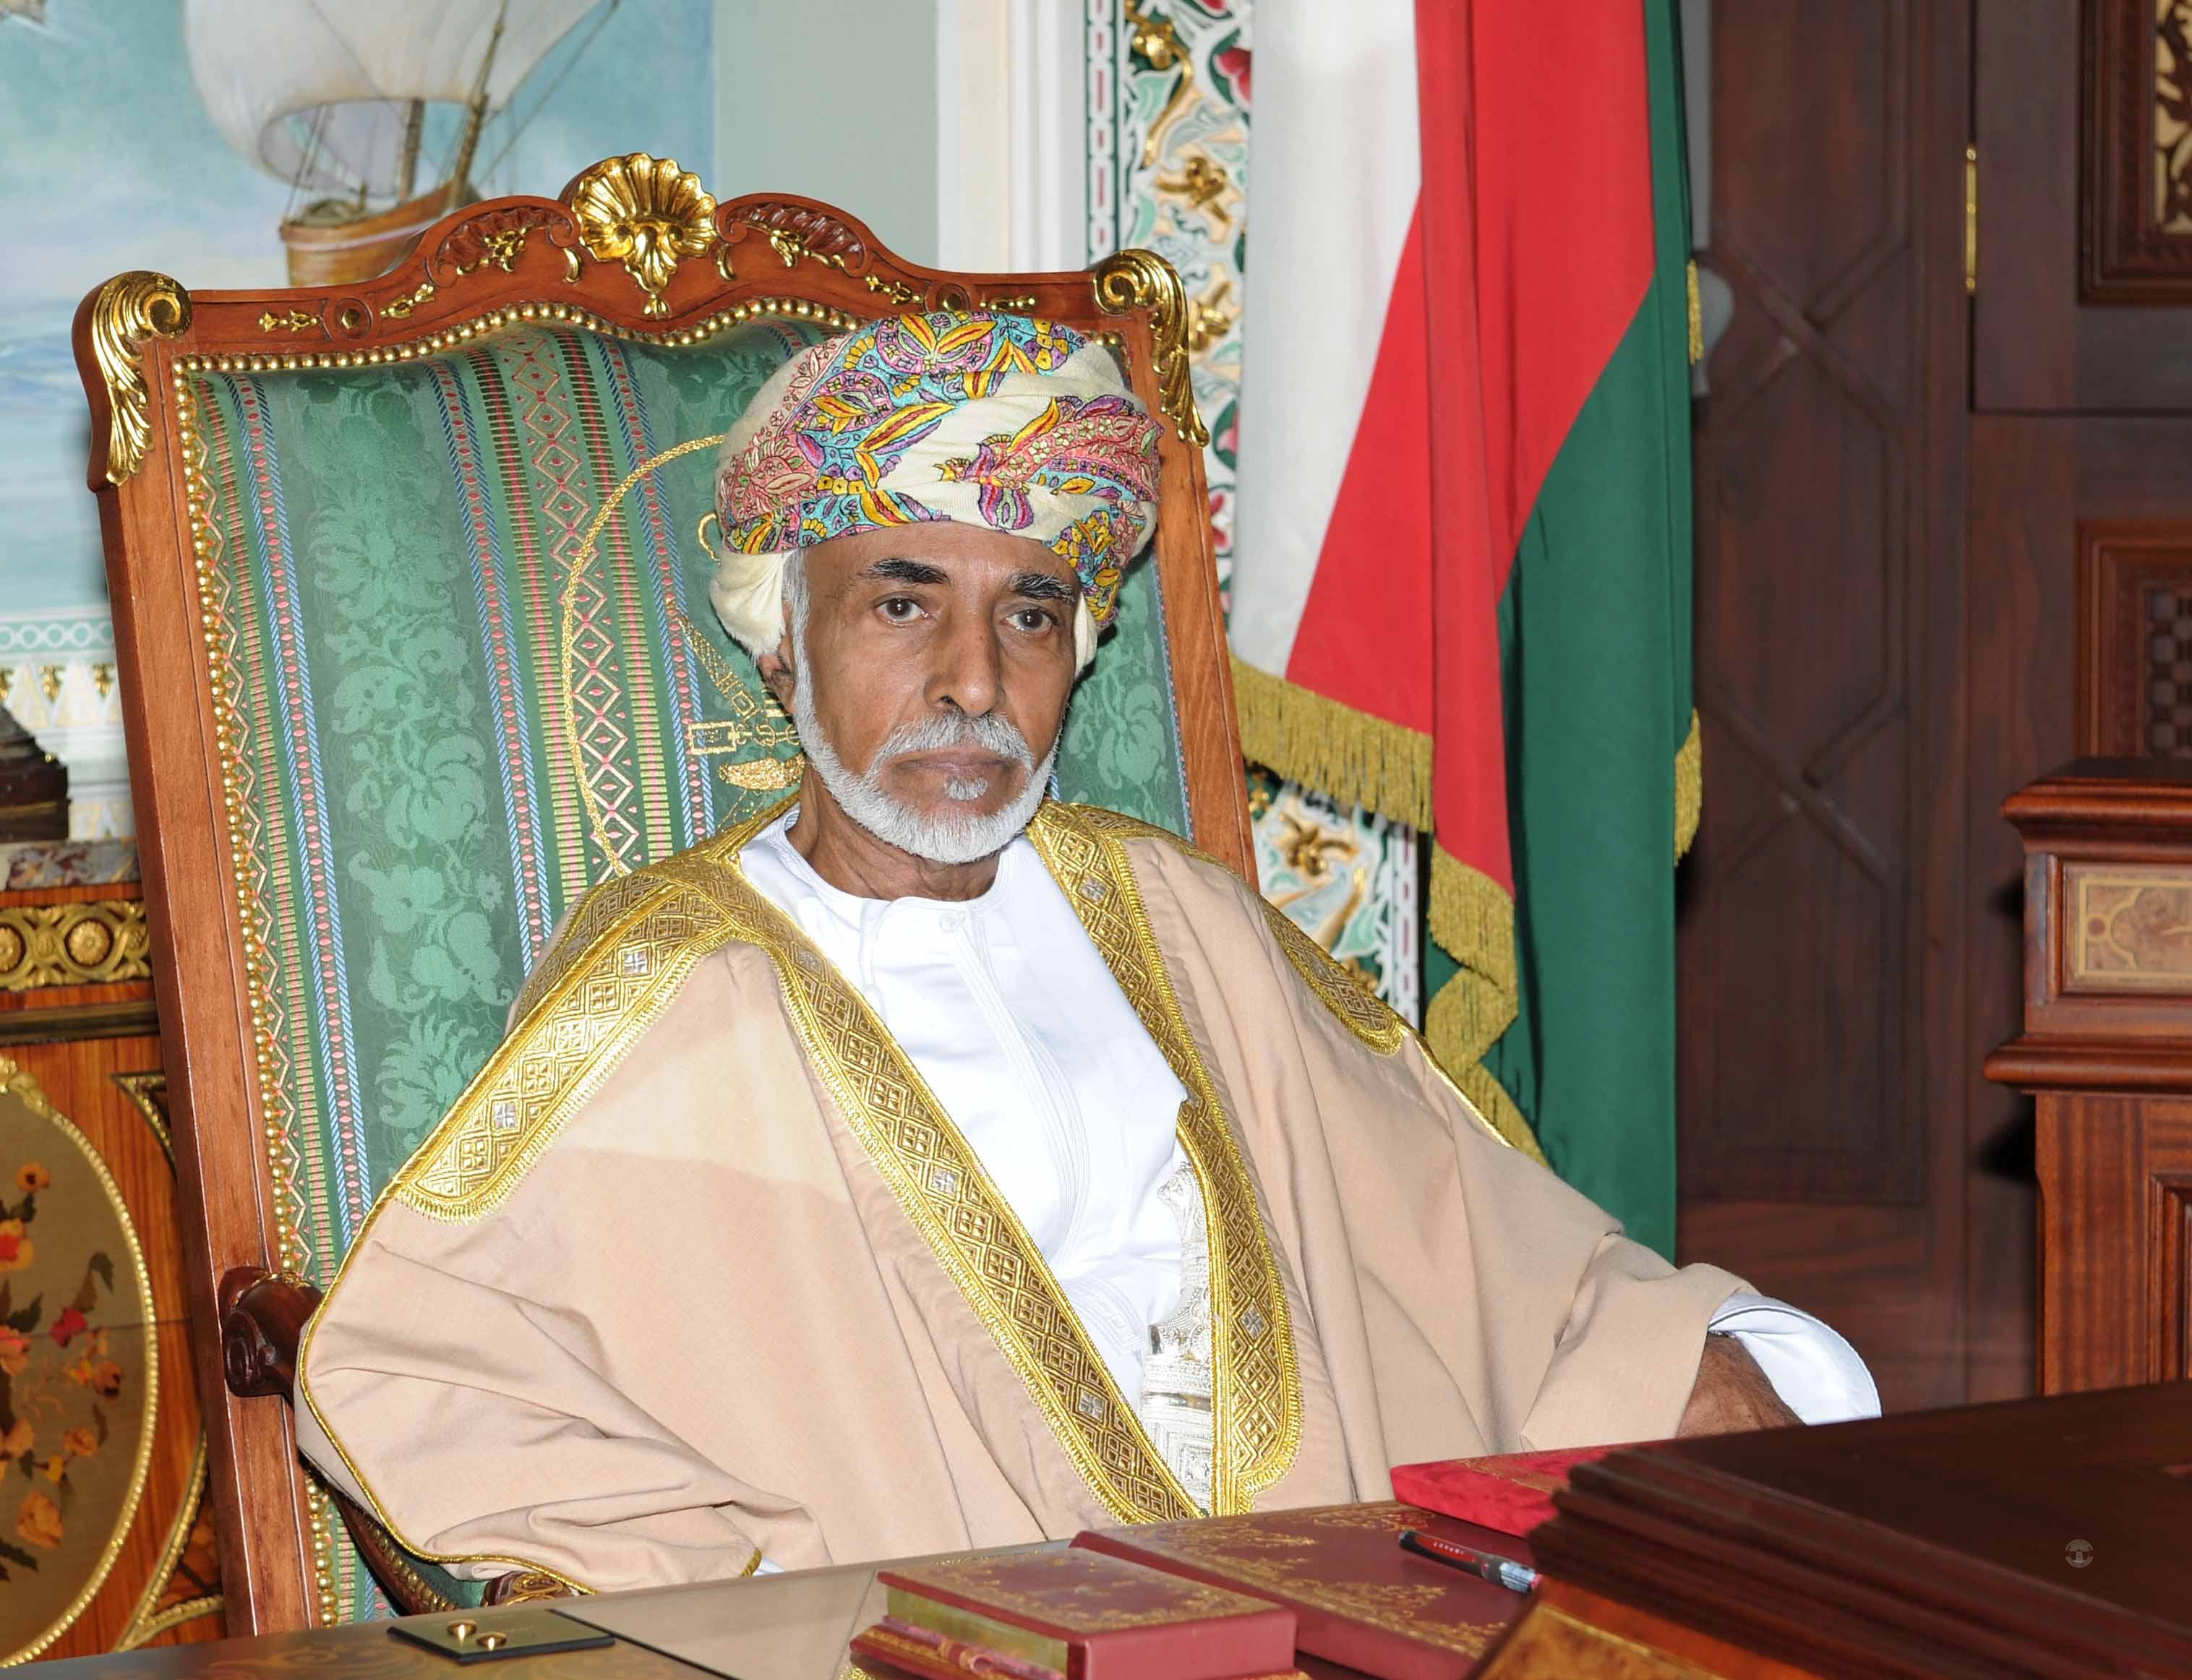 His Majesty Sultan Qaboos sends greetings to Egypt